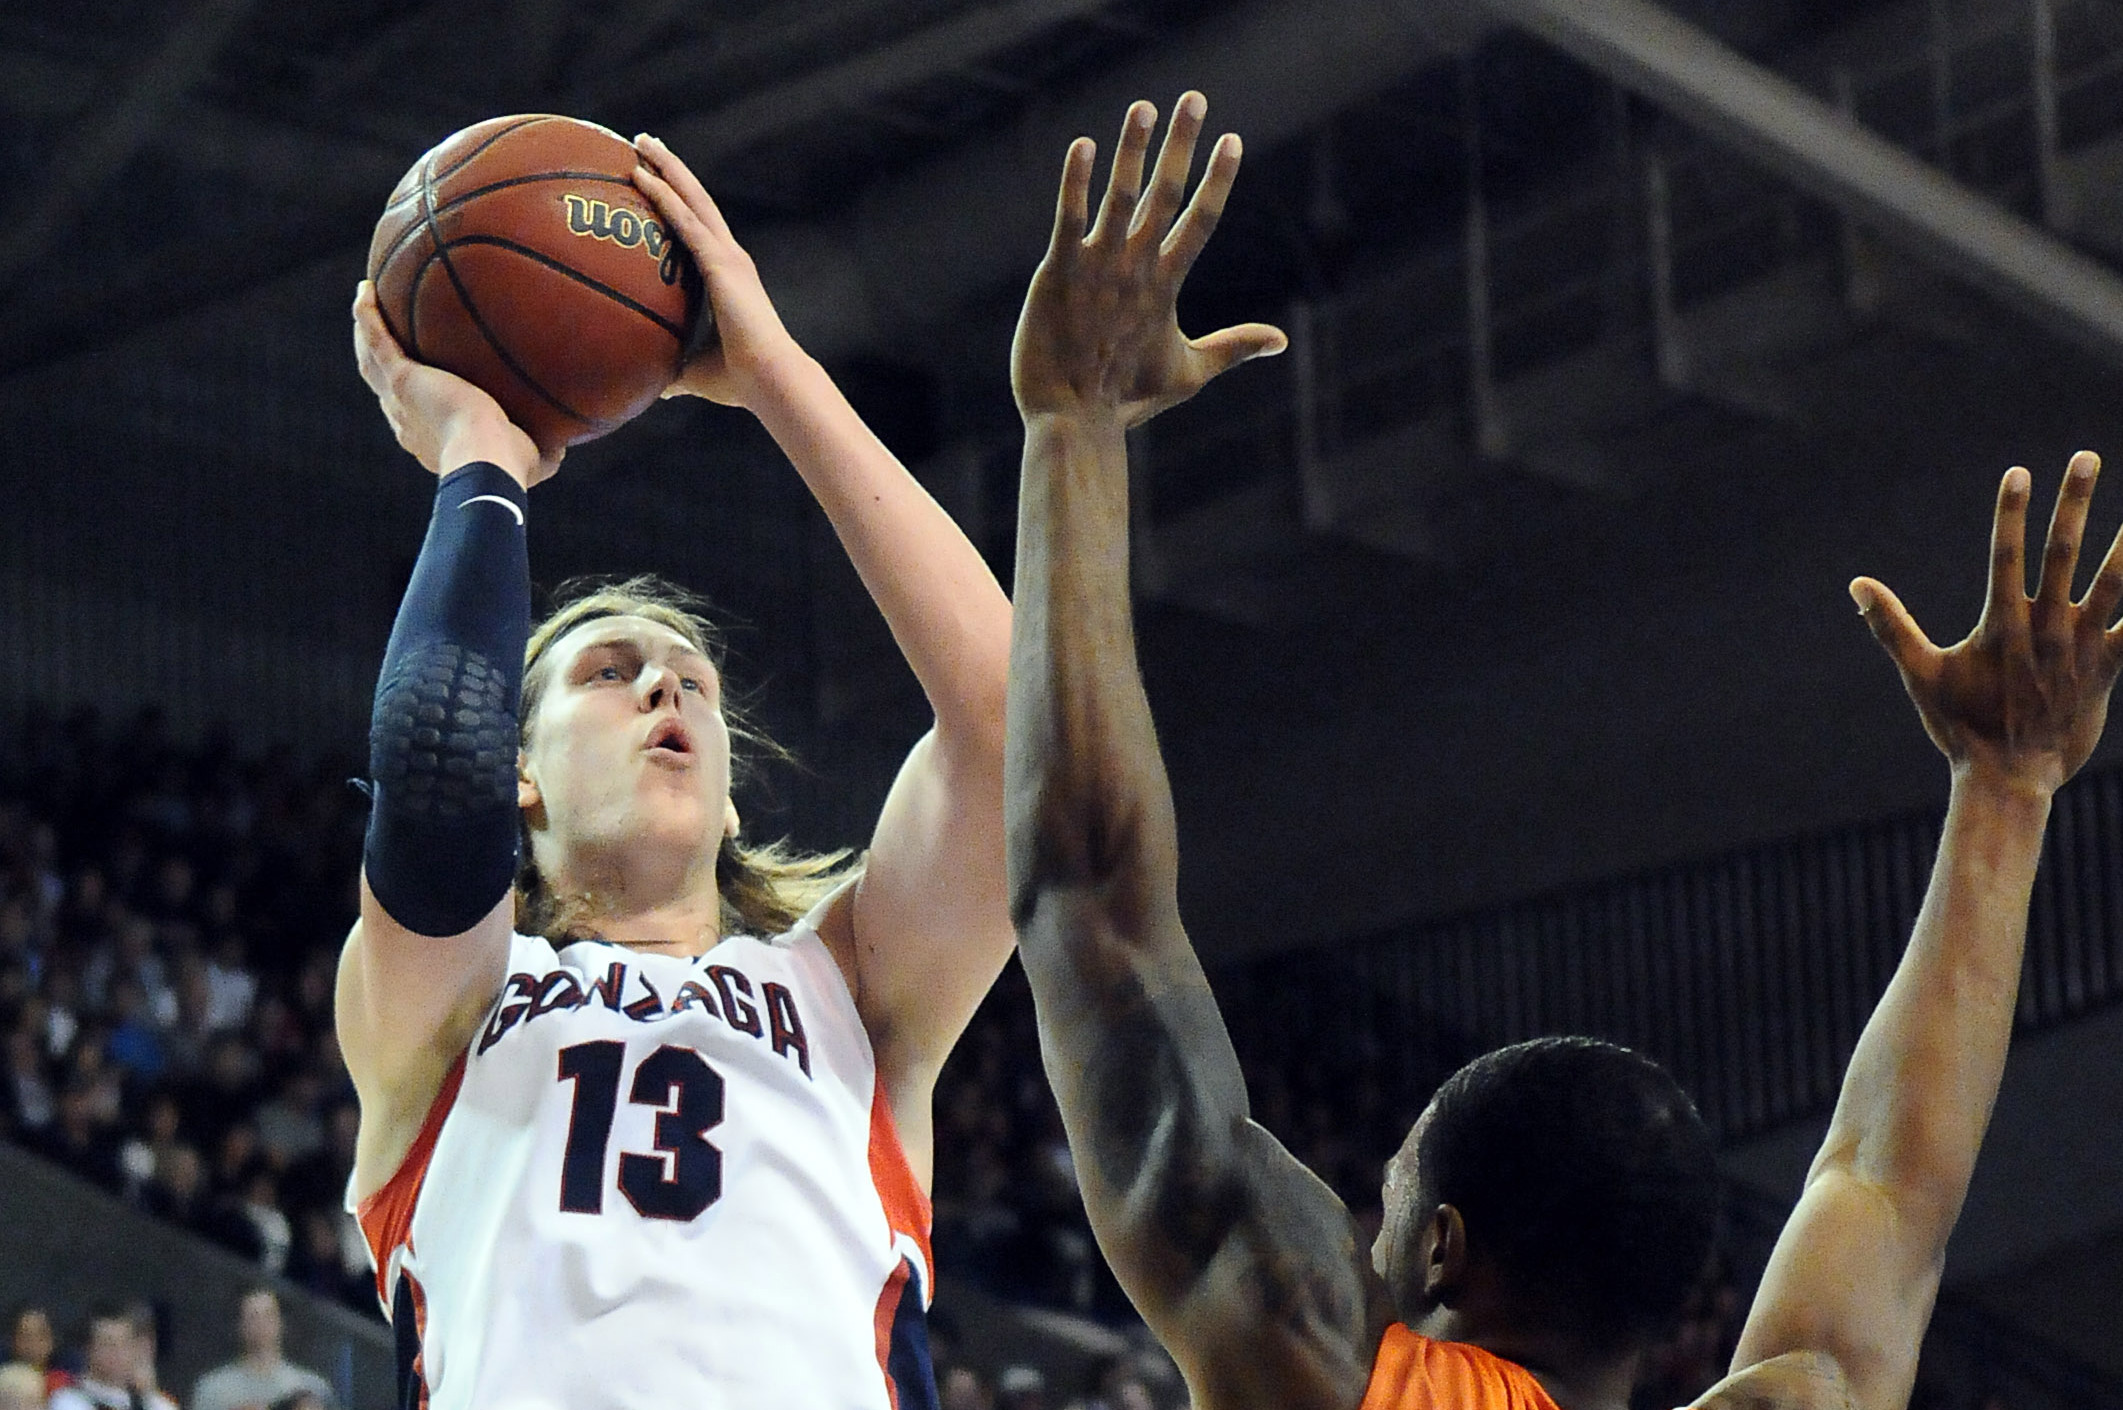 Kelly Olynyk redshirts to become main catalyst for surging Gonzaga